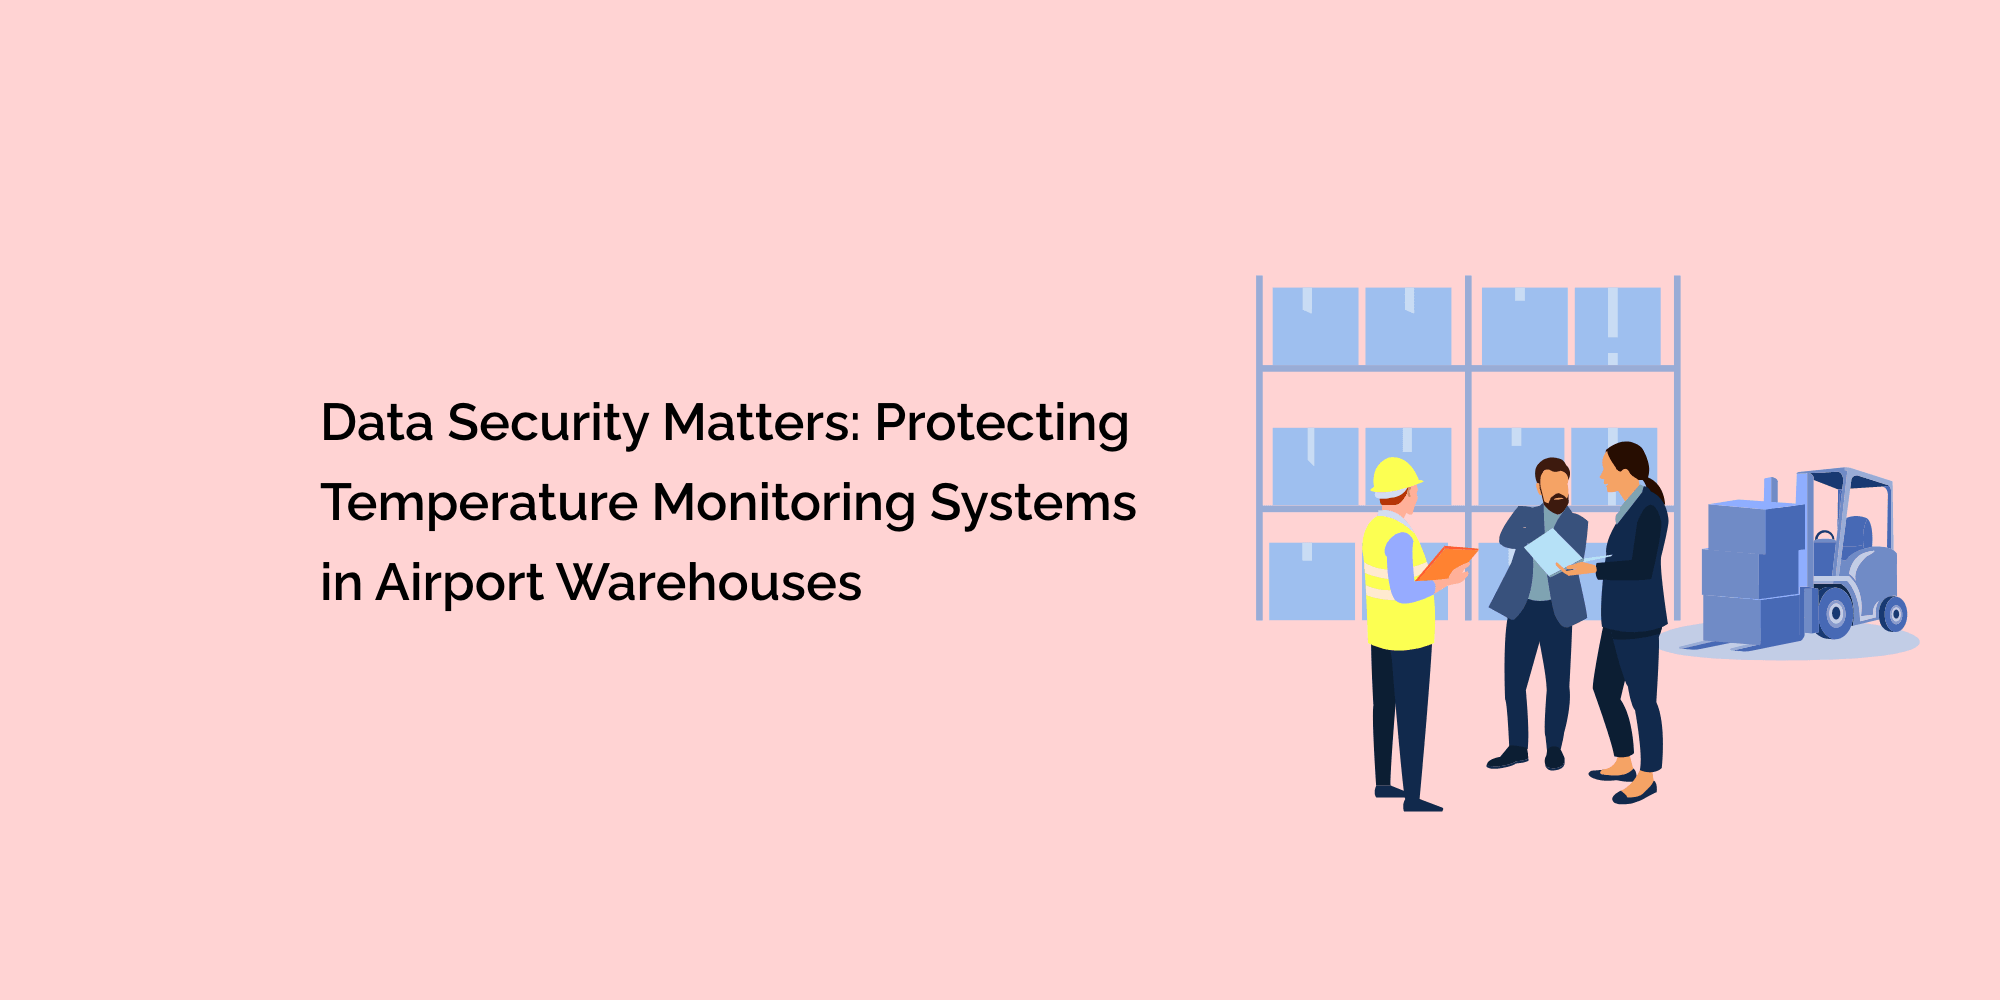 Data Security Matters: Protecting Temperature Monitoring Systems in Airport Warehouses